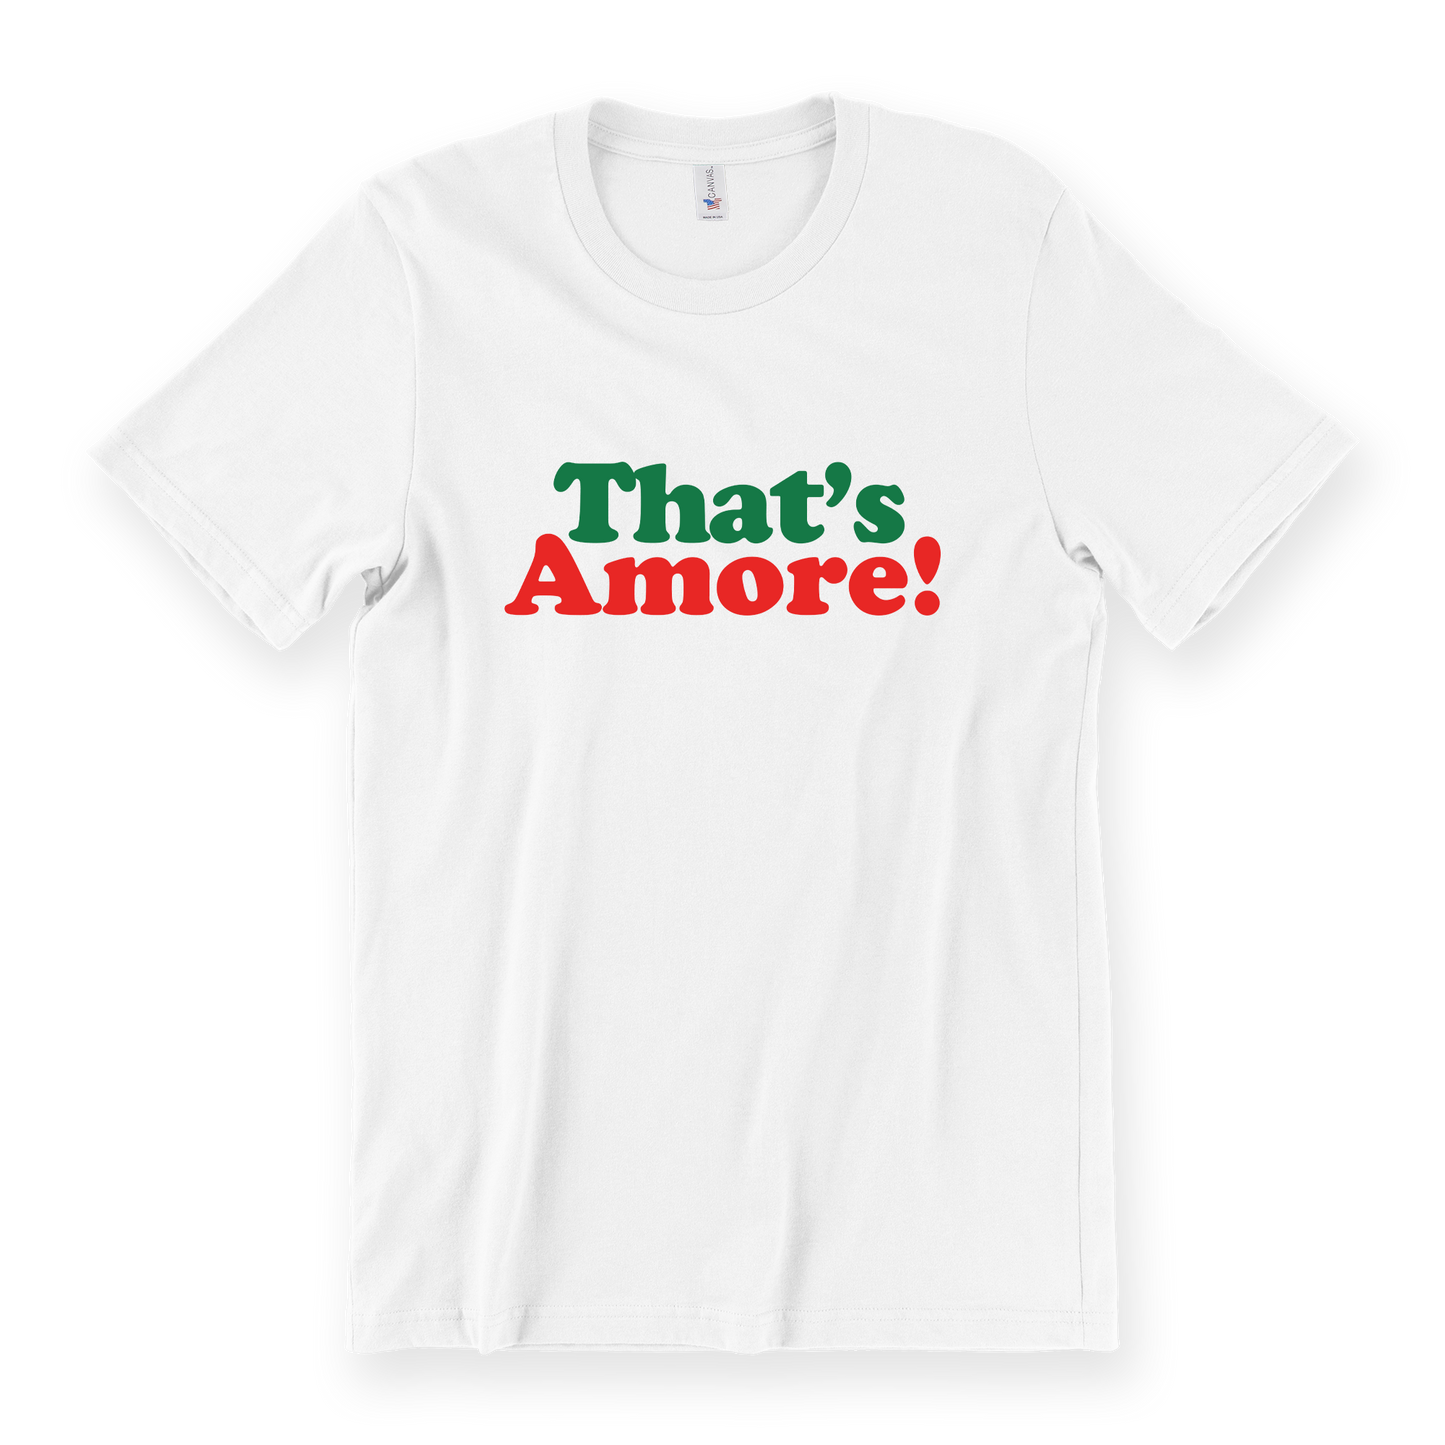 That's Amore! Tee - White